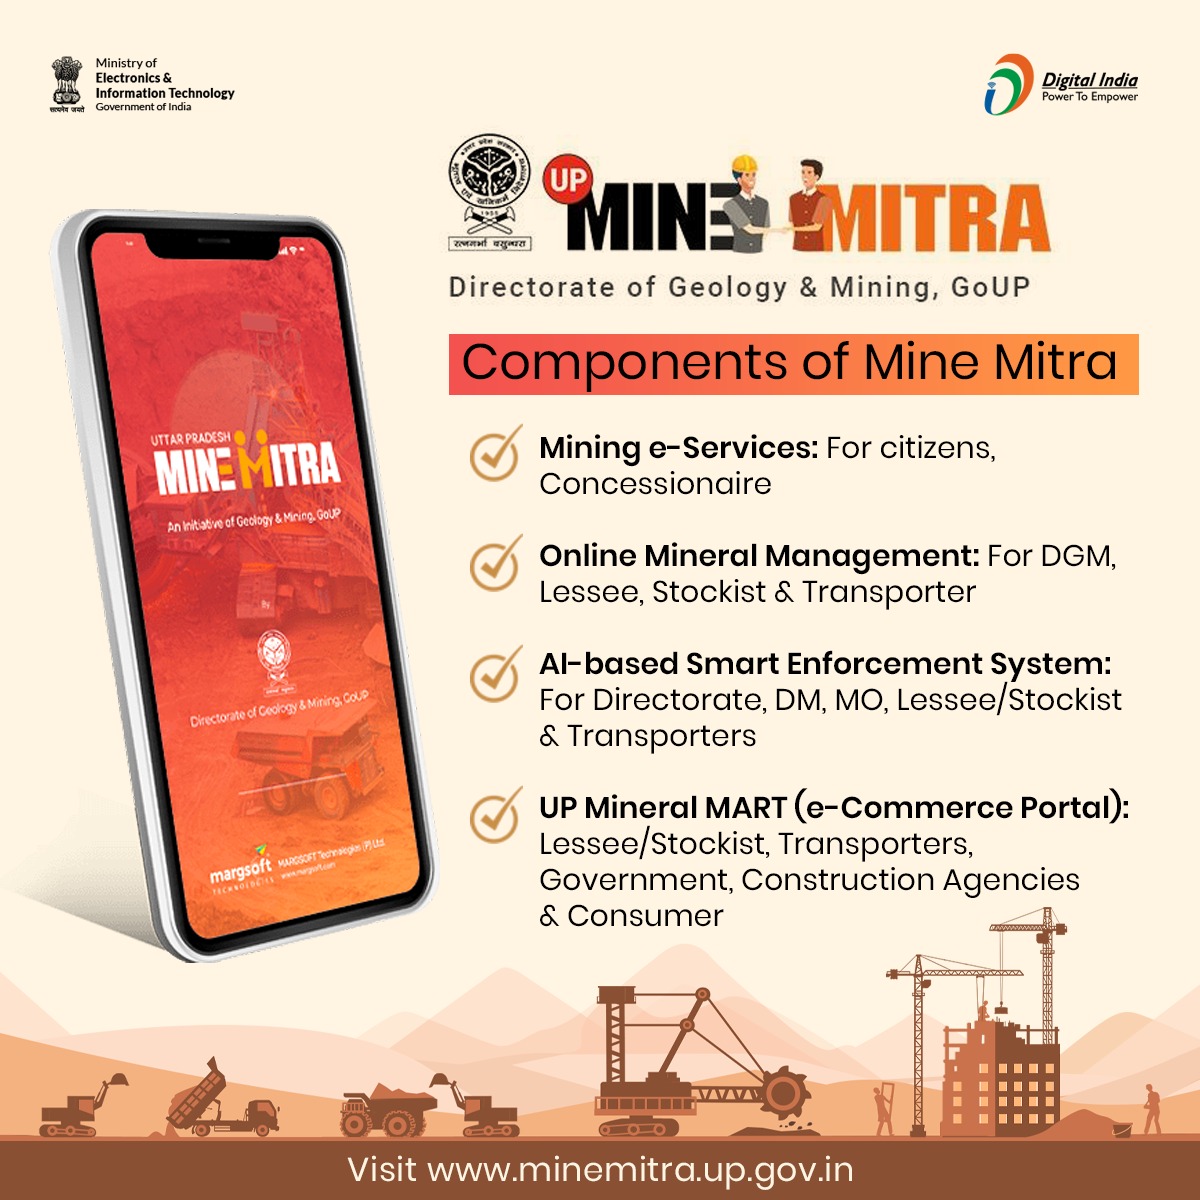 #MineMitra - A truly integrated platform for transparent mining management & citizen-centric services  API Integration with @MORTHIndia's (VAHAN) & other State Govt depts.

#CoalMinersDay #DigitalIndia #MineAwarenessday @MinesMinIndia @UPGovt